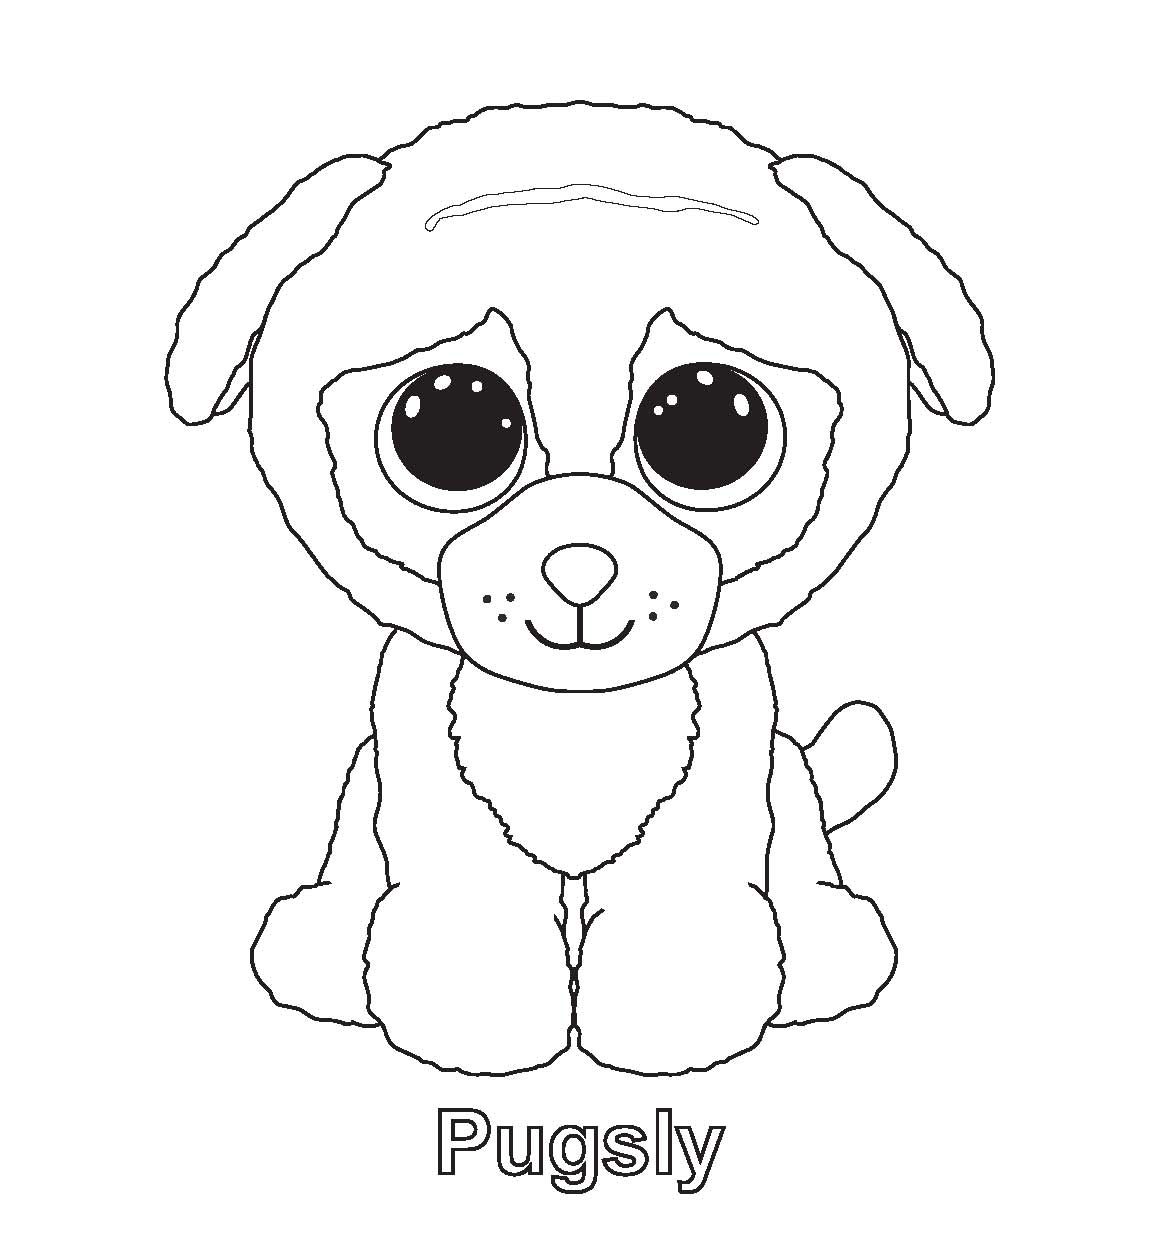 Pugsly Beanie Boo Coloring Pages